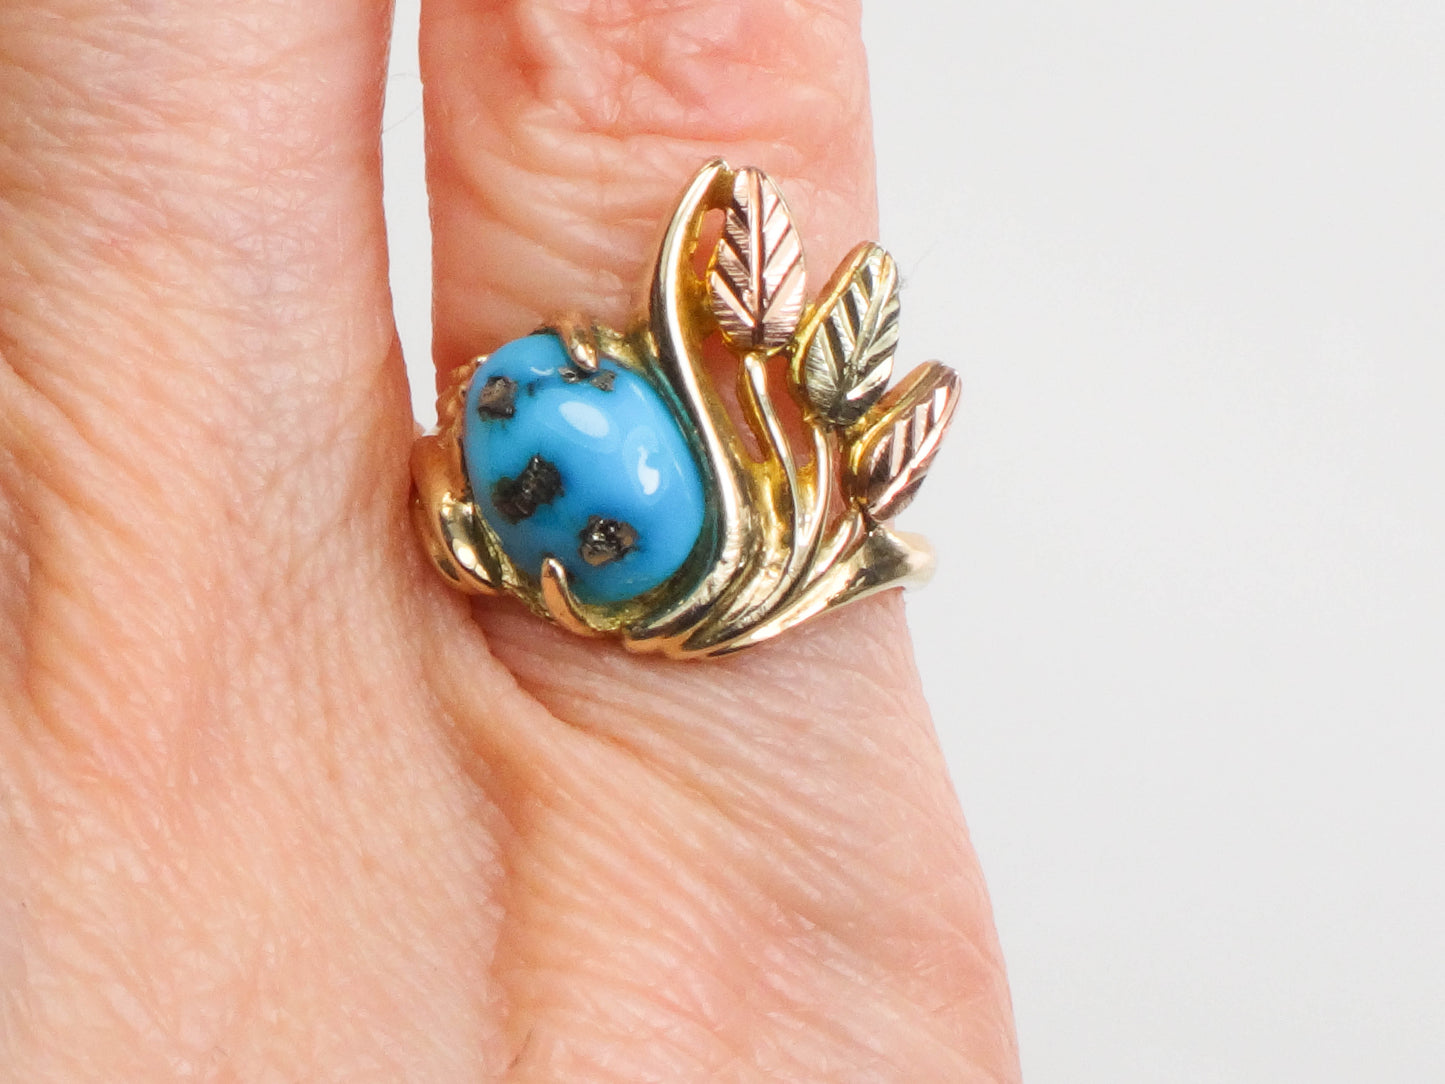 Vintage 10k Yellow and Rose Gold Turquoise Ring with Leaves and Berries, Size 4